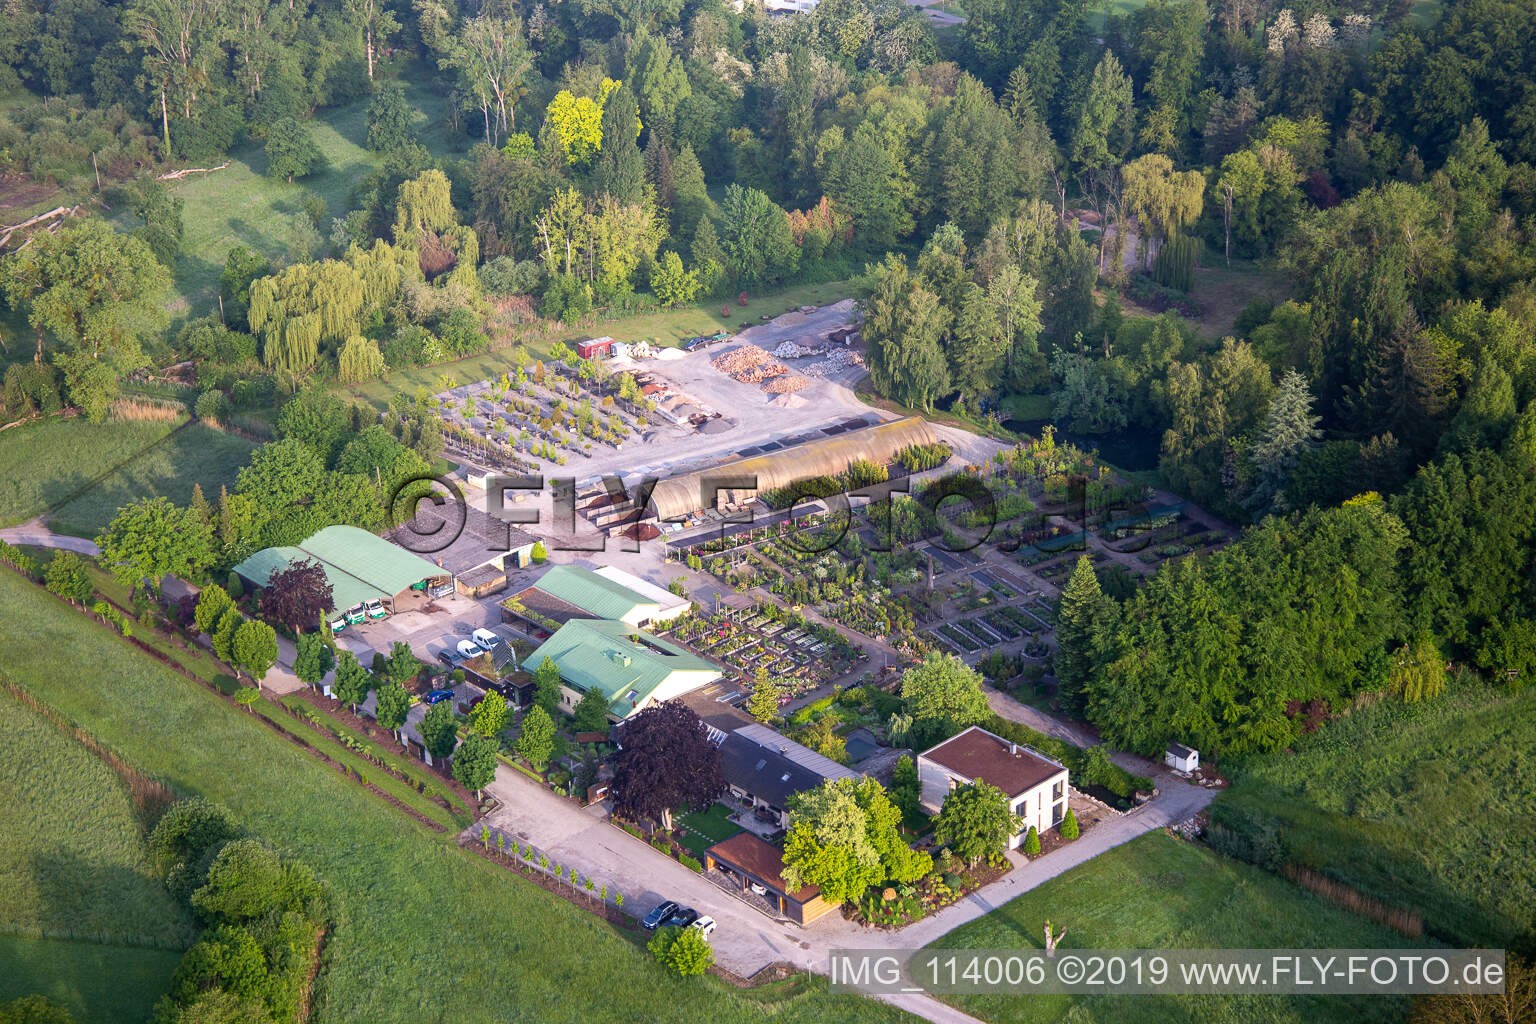 Bienwald tree nursery / Greentec in Berg in the state Rhineland-Palatinate, Germany from above